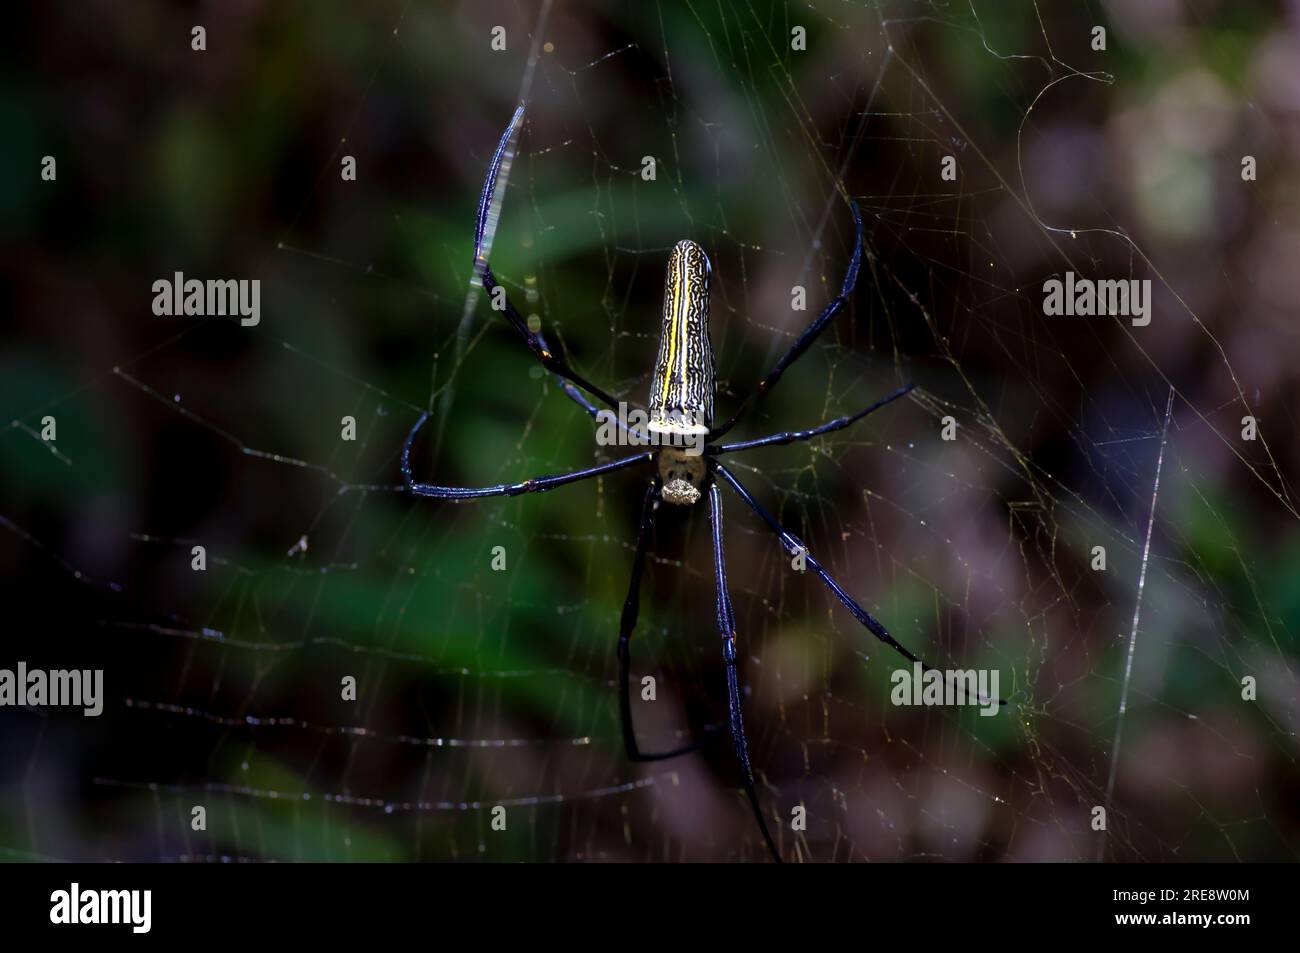 Giant Wood Spider, golden orb weaver spider, Nephila plumipes, banana spider, hanging on its web. Stock Photo